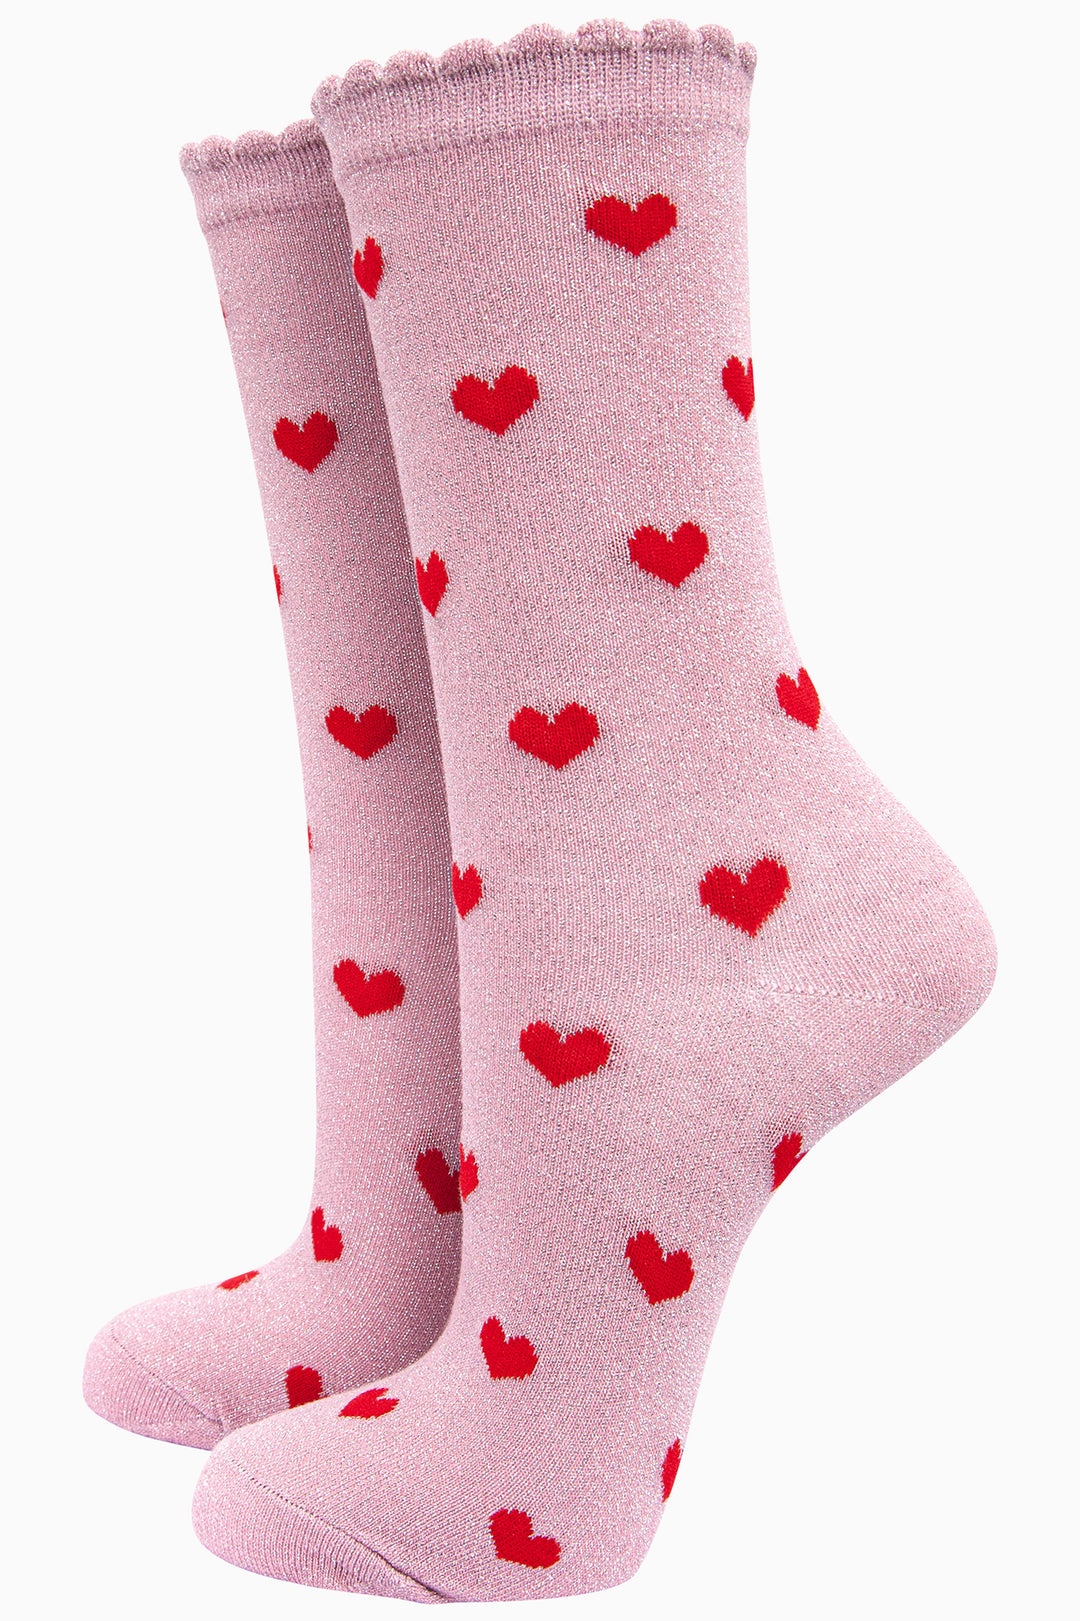 pink glitter ankle socks with an all over sparkle and red love heart pattern, with scalloped cuffs